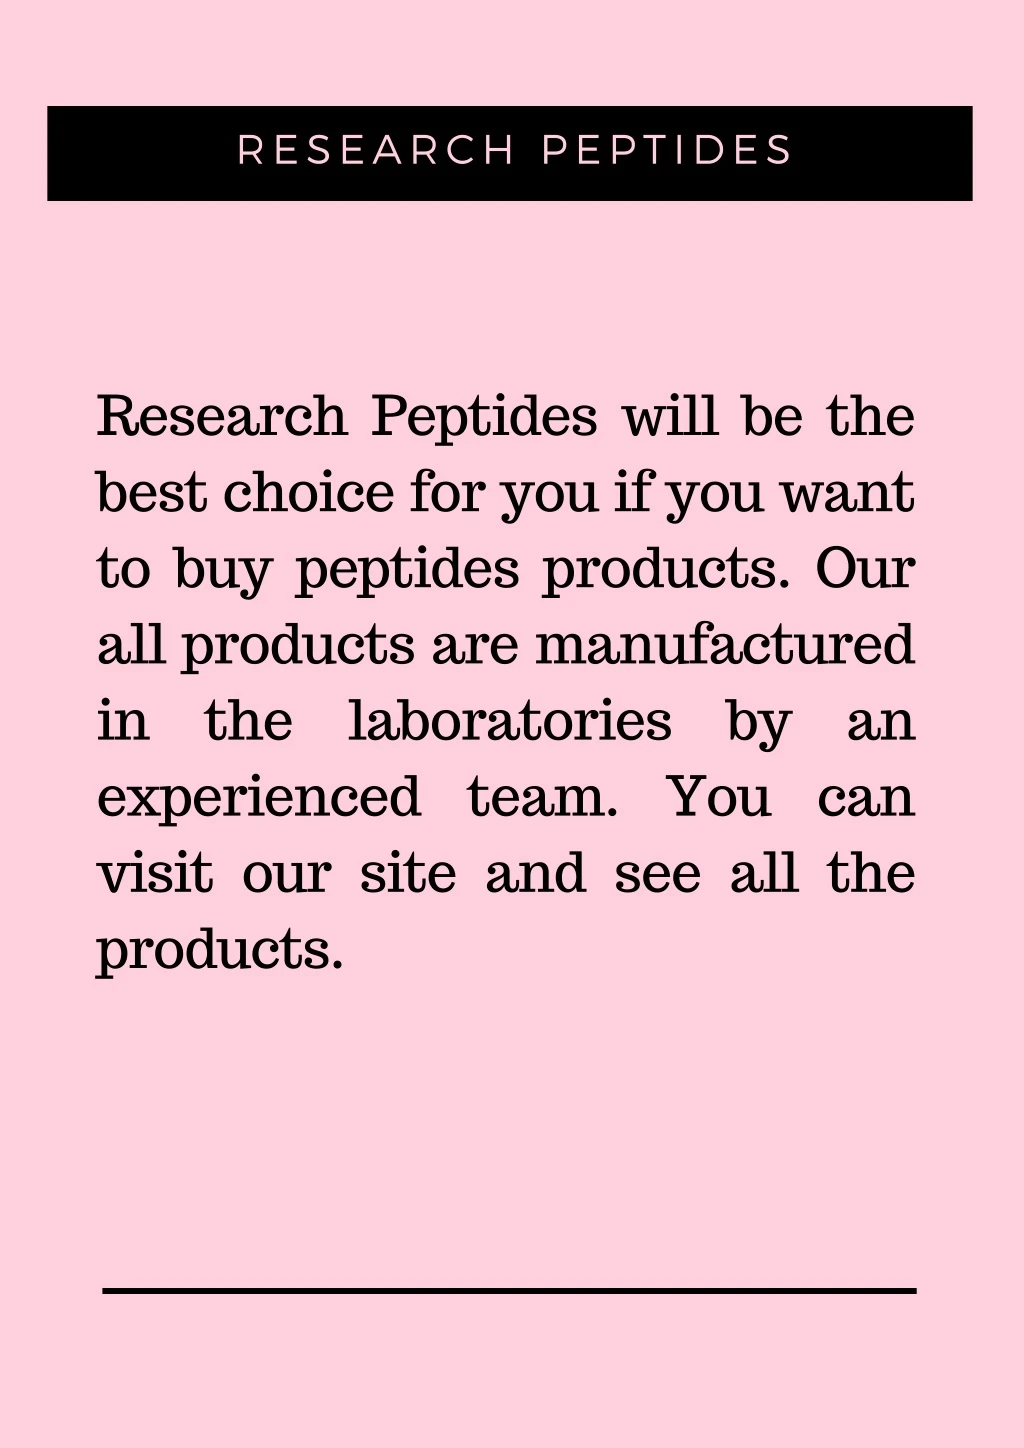 research peptides